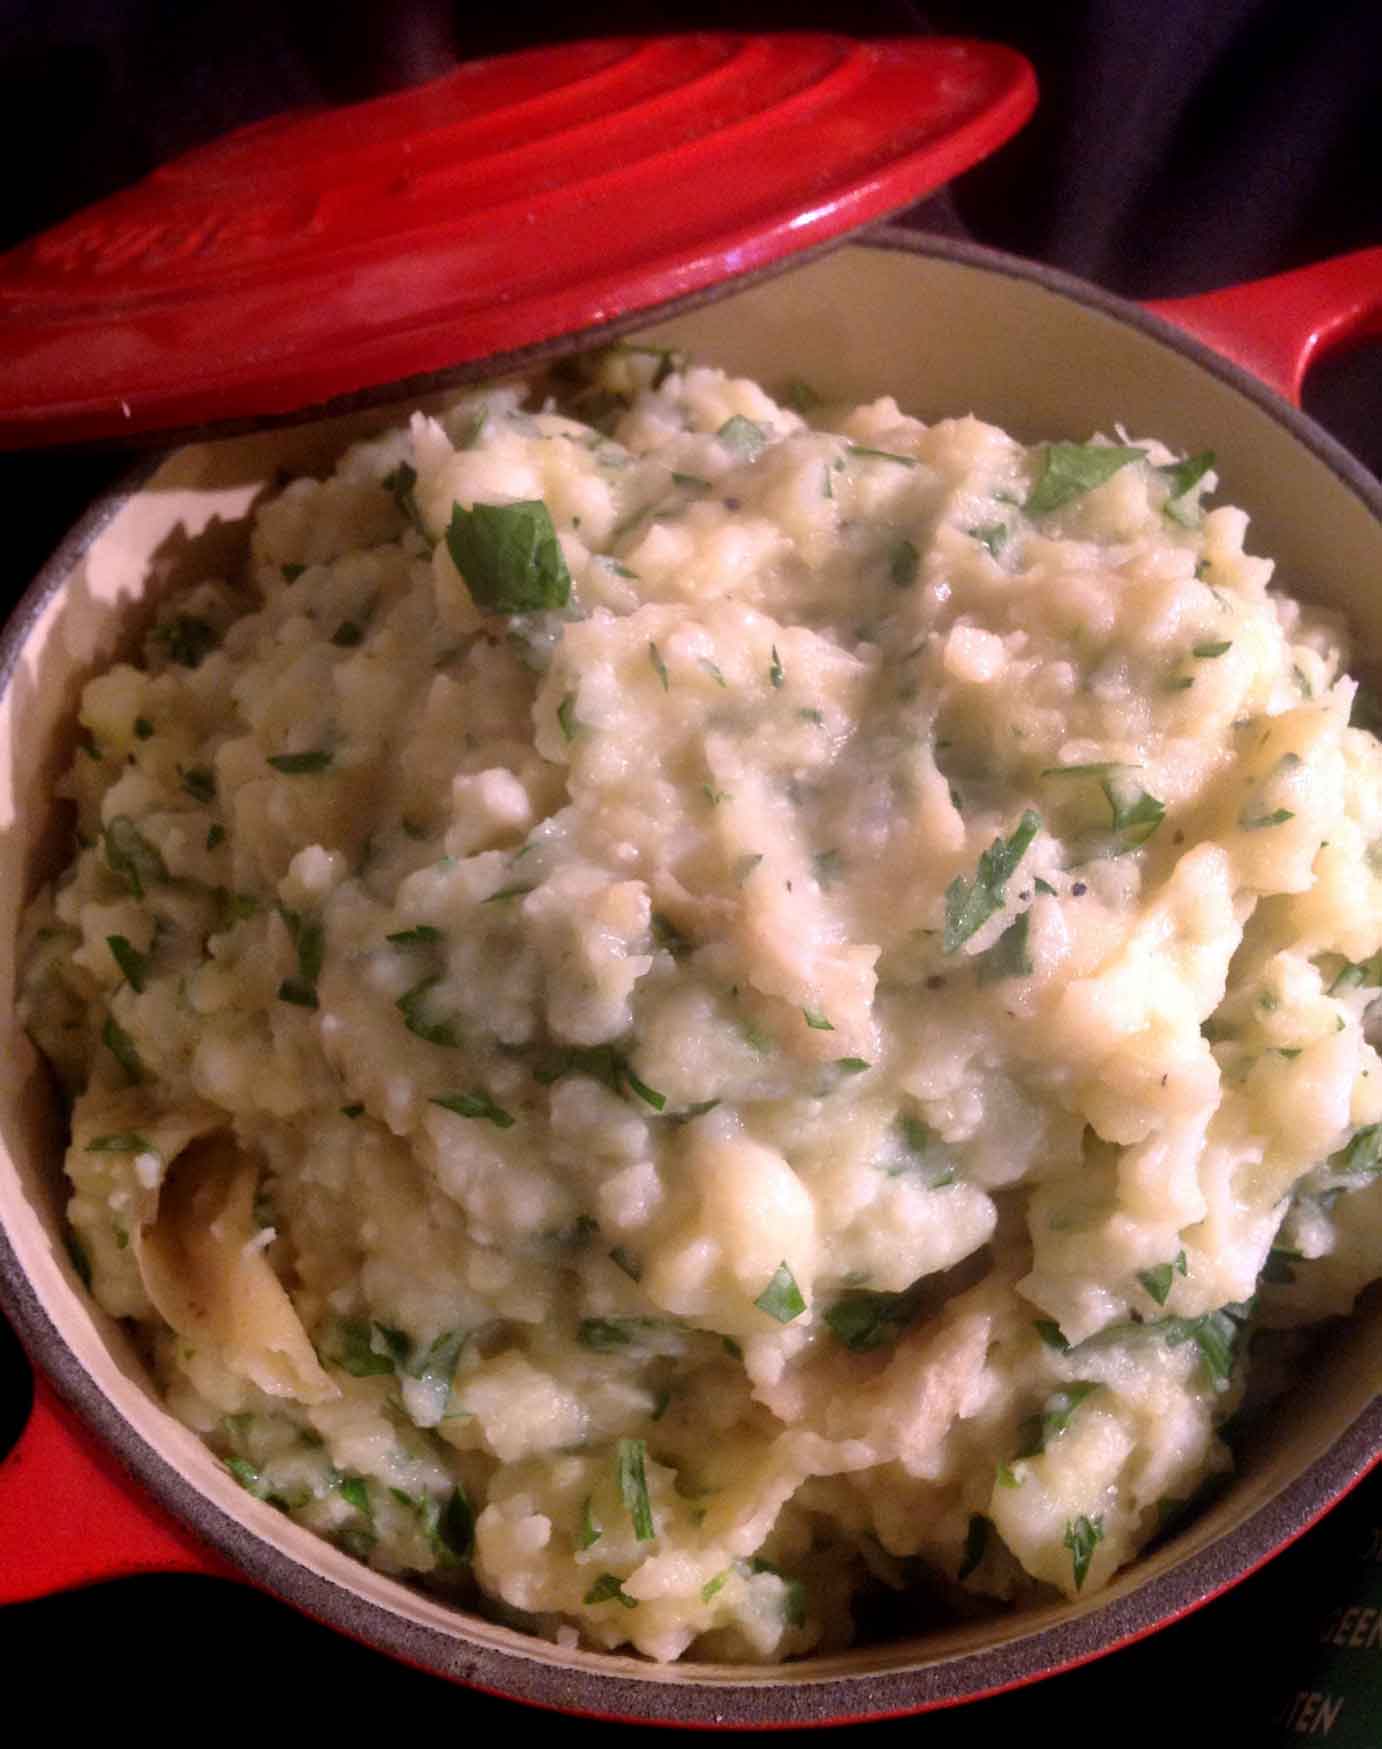 Herbed cauliflower and potato mash - try this healthy recipe!